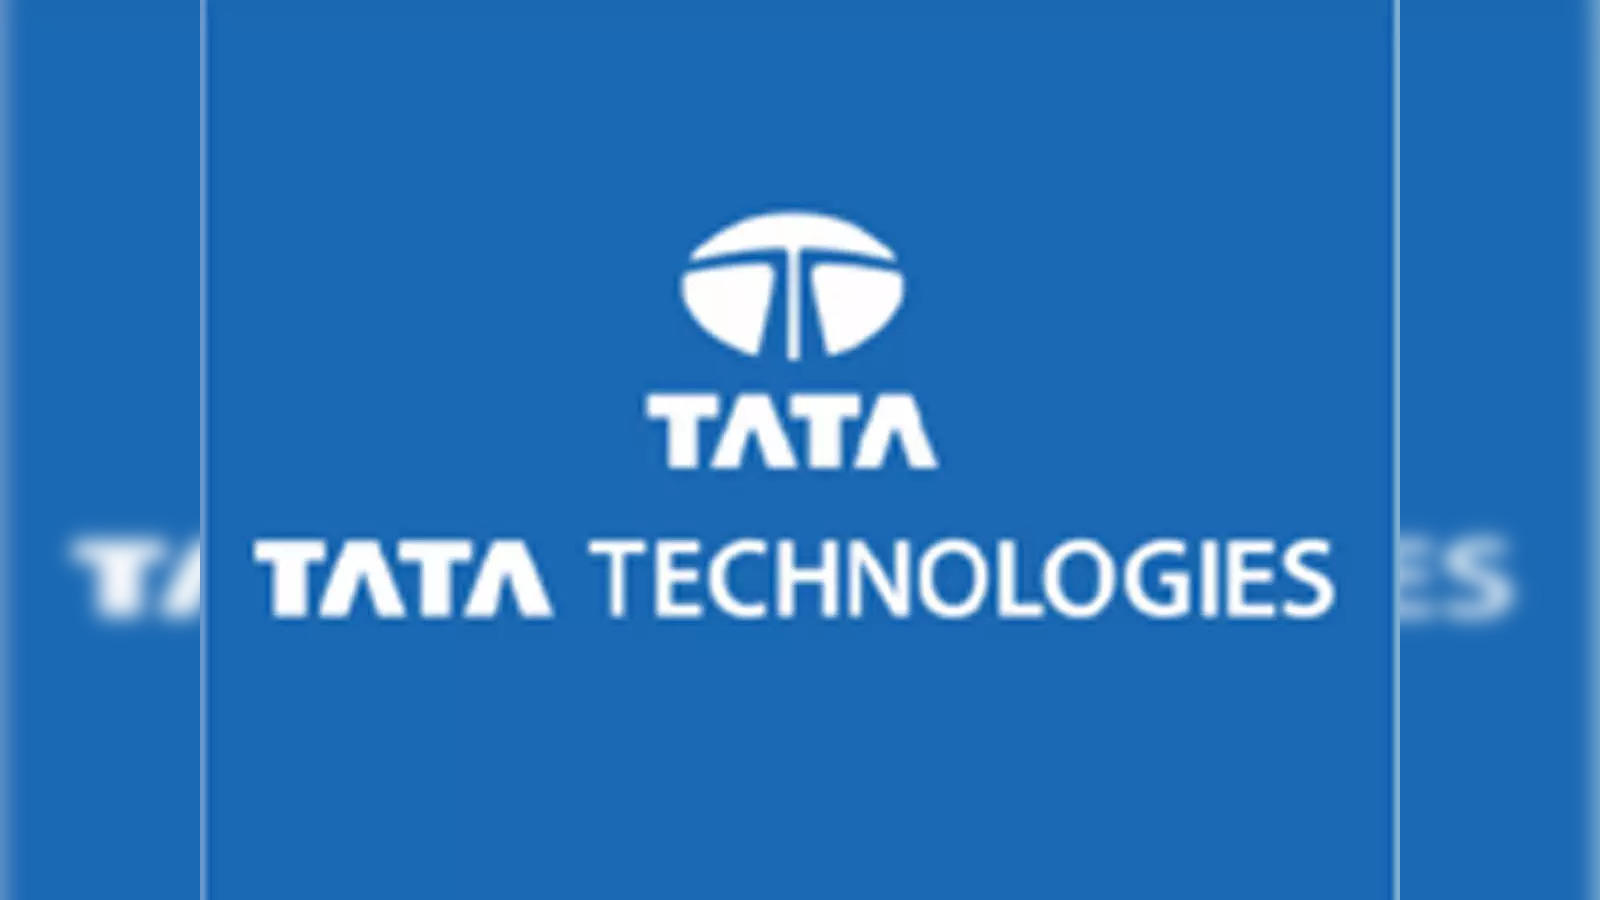 tata group stocks: Tata Technologies' predecessor TCS is a crown jewel for  investors. Will it follow suit? - The Economic Times